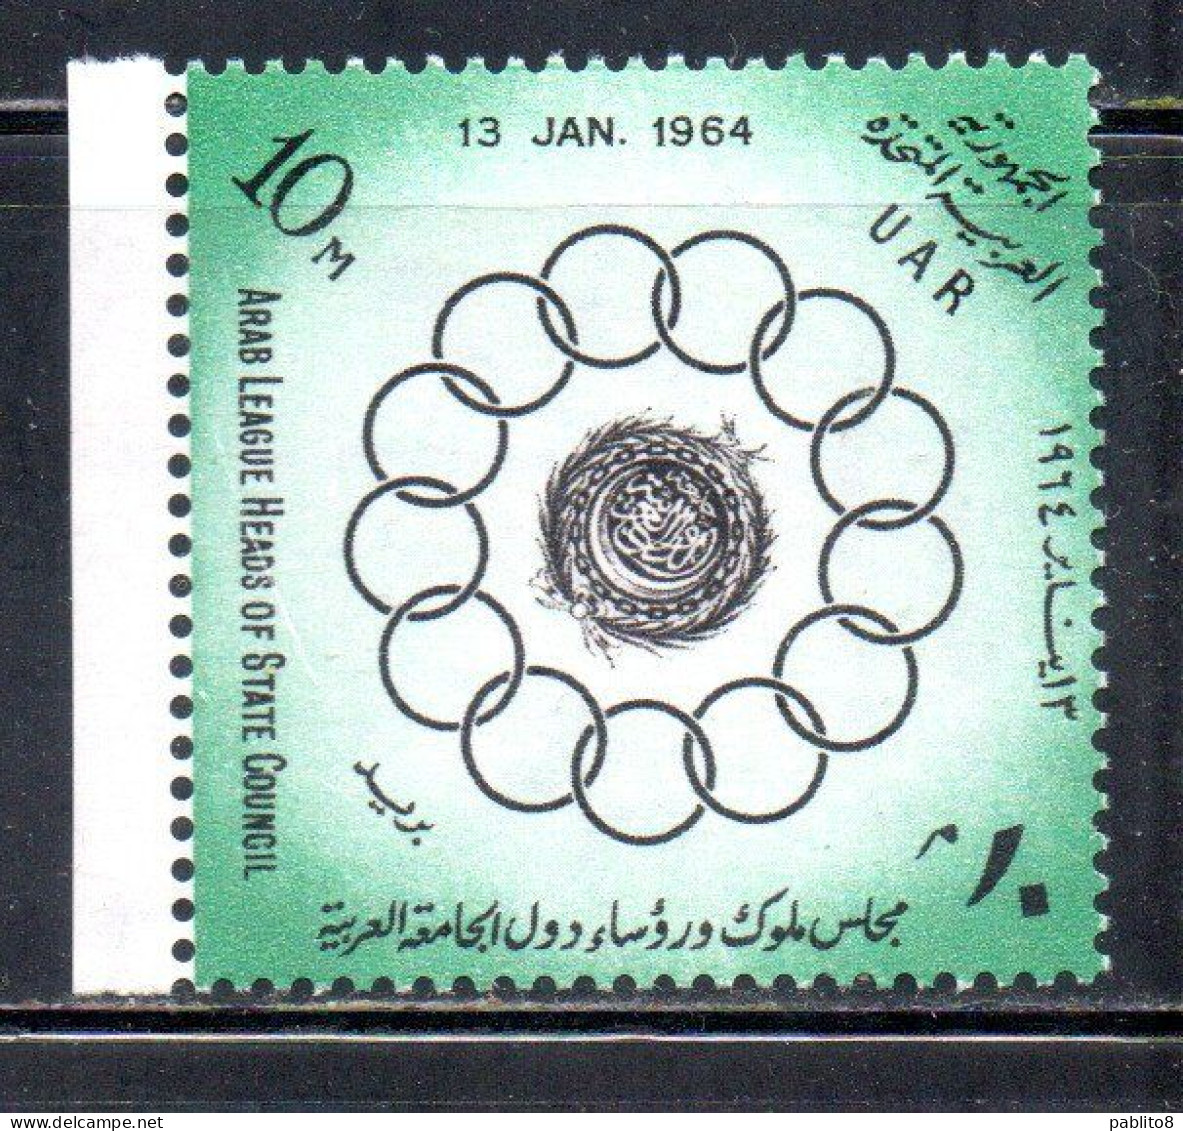 UAR EGYPT EGITTO 1964 FIRST MEETING OF THE HEADS STATE OF THE ARAB LEAGUE CAIRO 10m MNH - Neufs